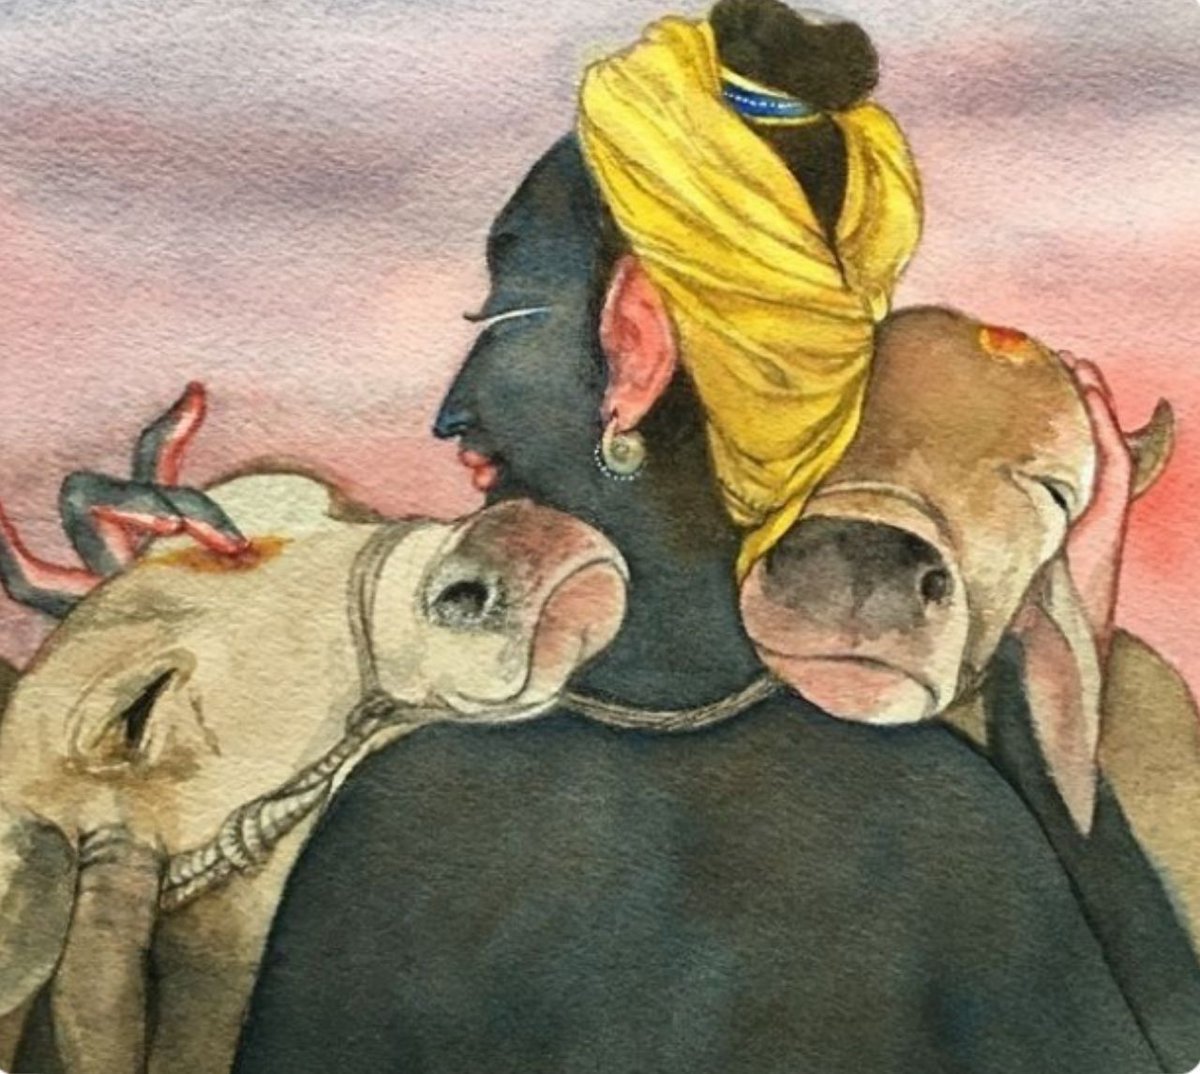 Shrīkrushṇa showed us that there is so much power in cow’s milk, ghee and Panchagavya (A mixture of cow’s milk, curd, ghee, cow’s urine and cow dung), that by consuming these He became so powerful that was able to defeat the powerful demons who fed on meat.